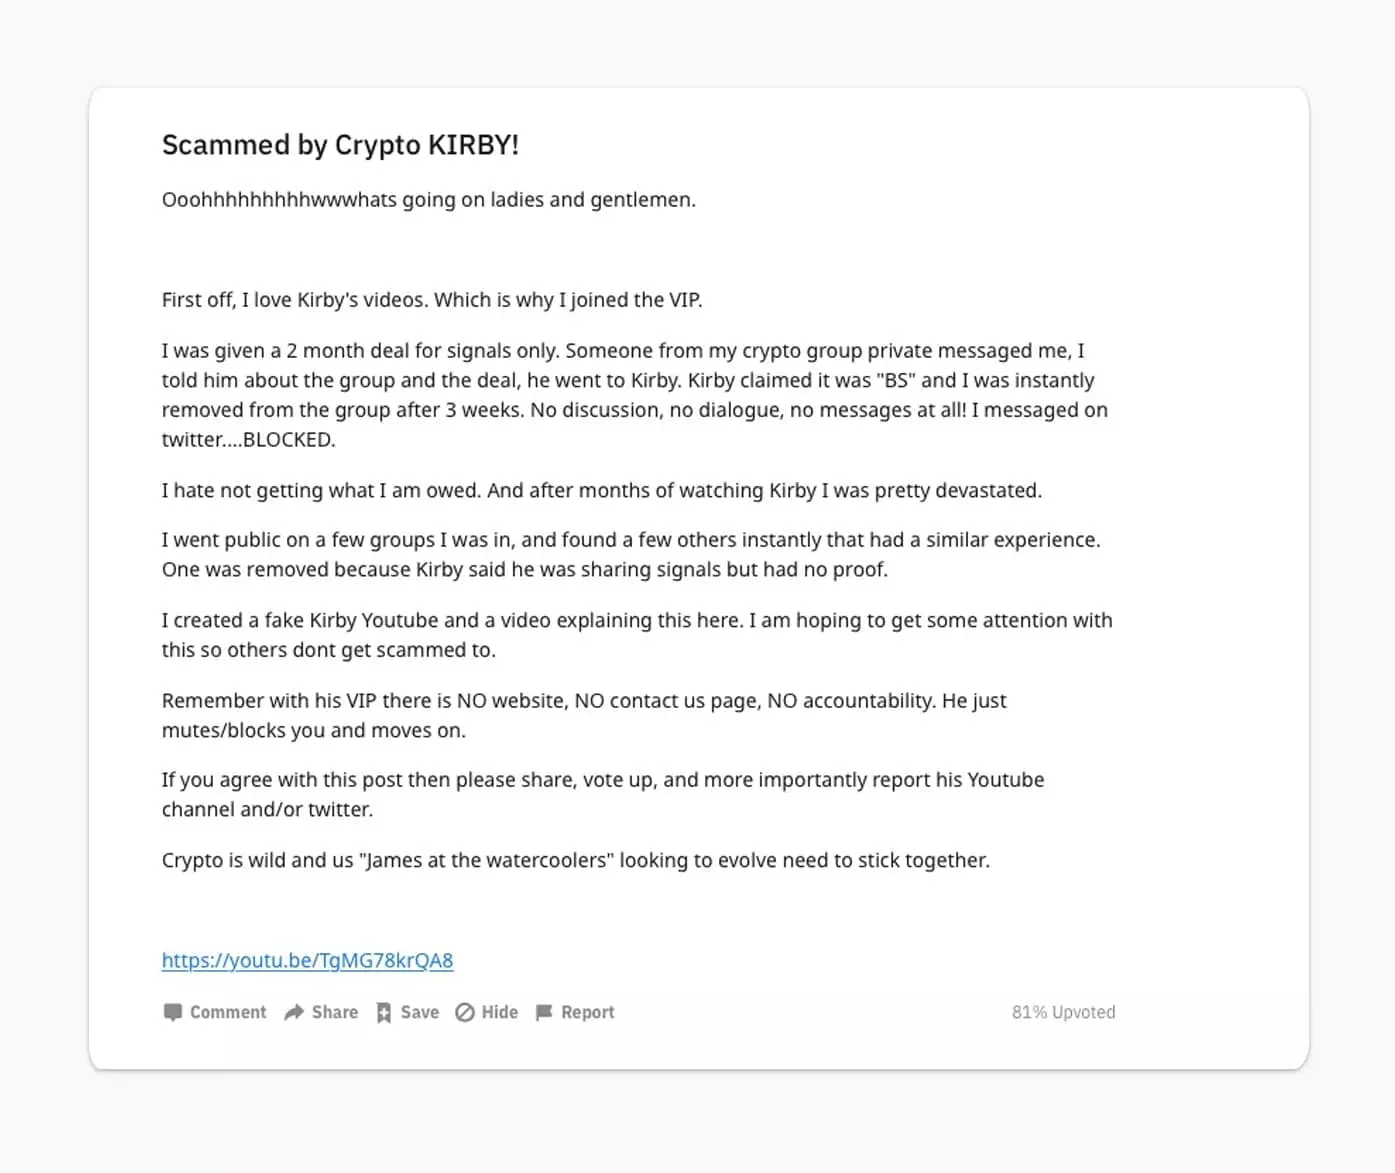 user was scammed by crypto kirby 